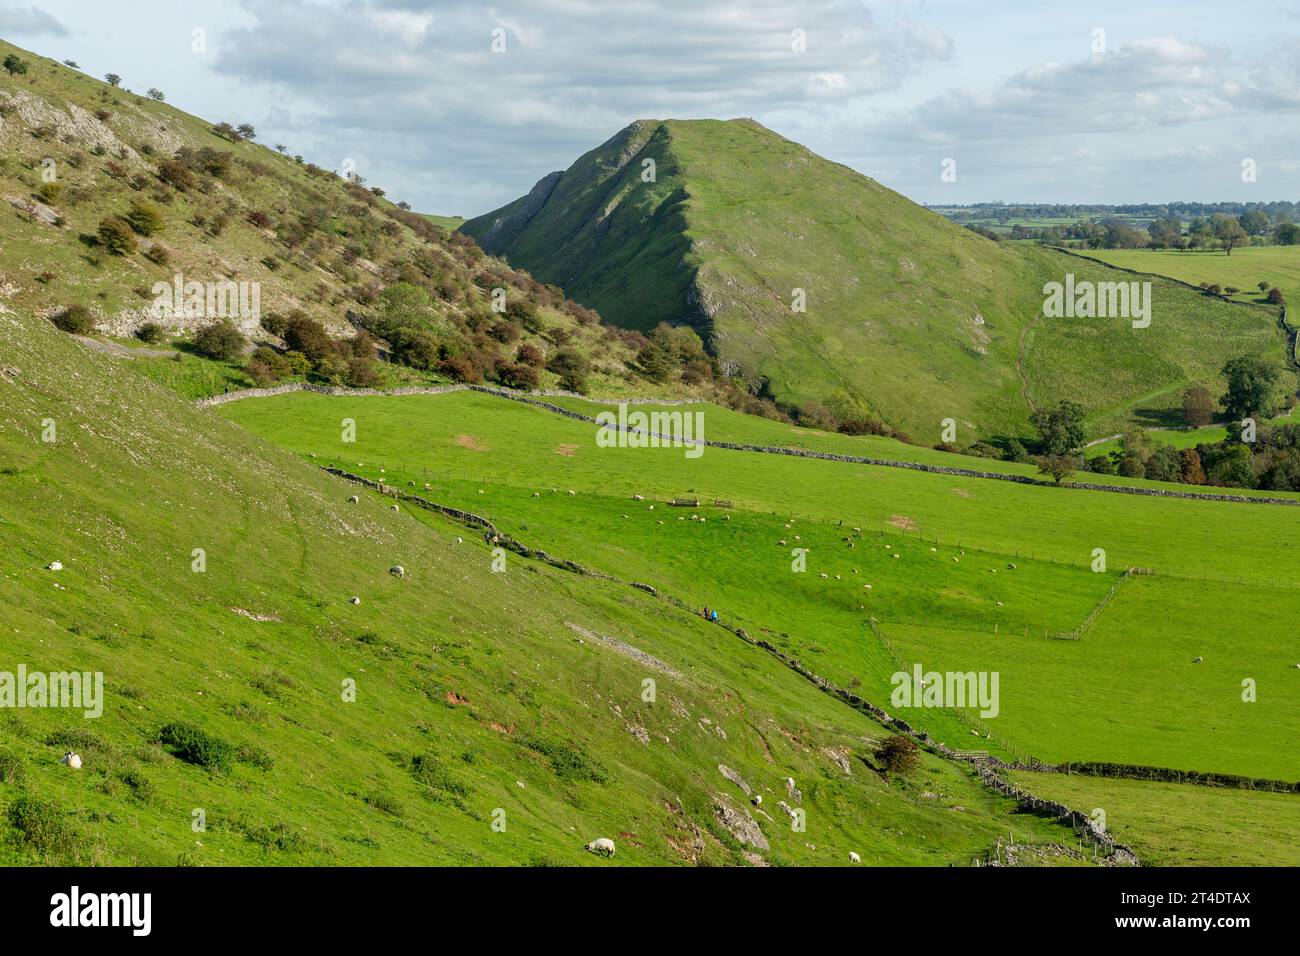 Thorpe Cloud seen from Bunster Hill, Peak District, Derbyshire, England Stock Photo